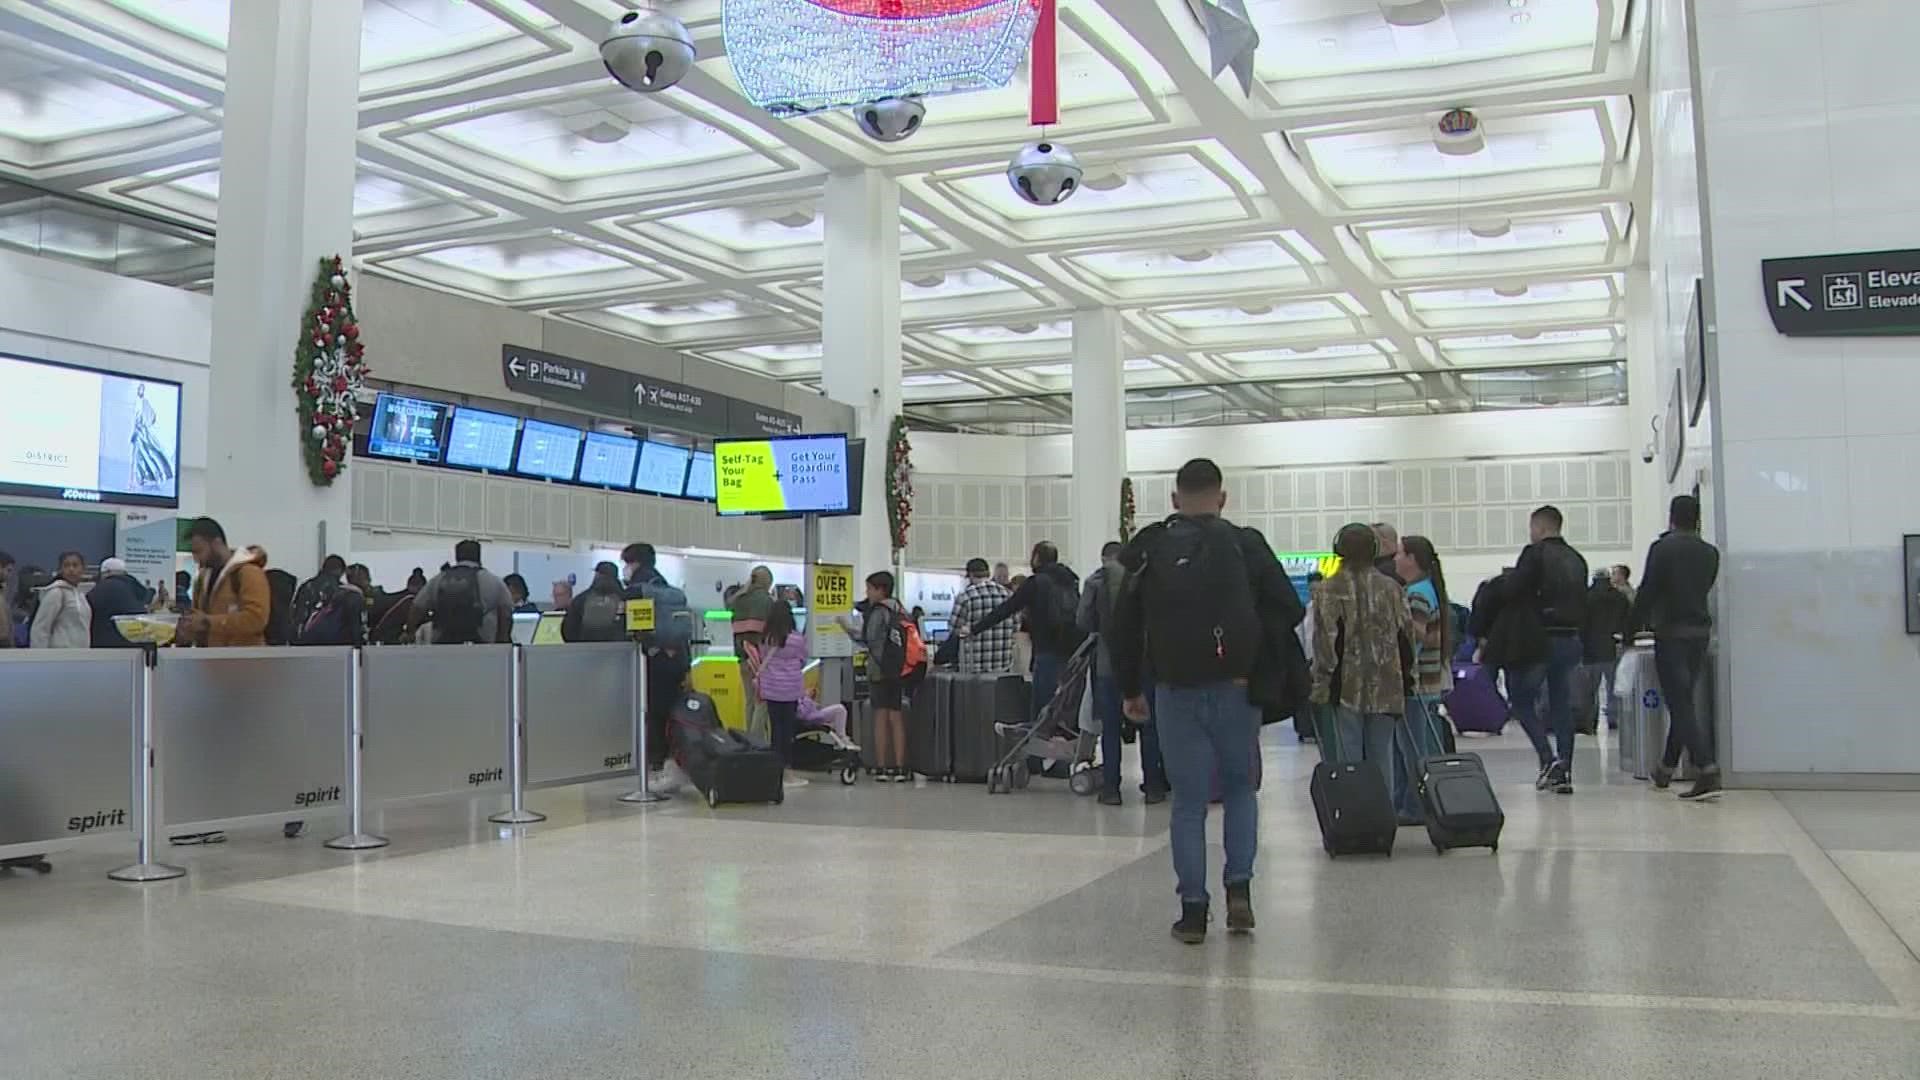 With Houston airports expecting extra traffic, officials are recommending travelers show up an hour earlier than normal.